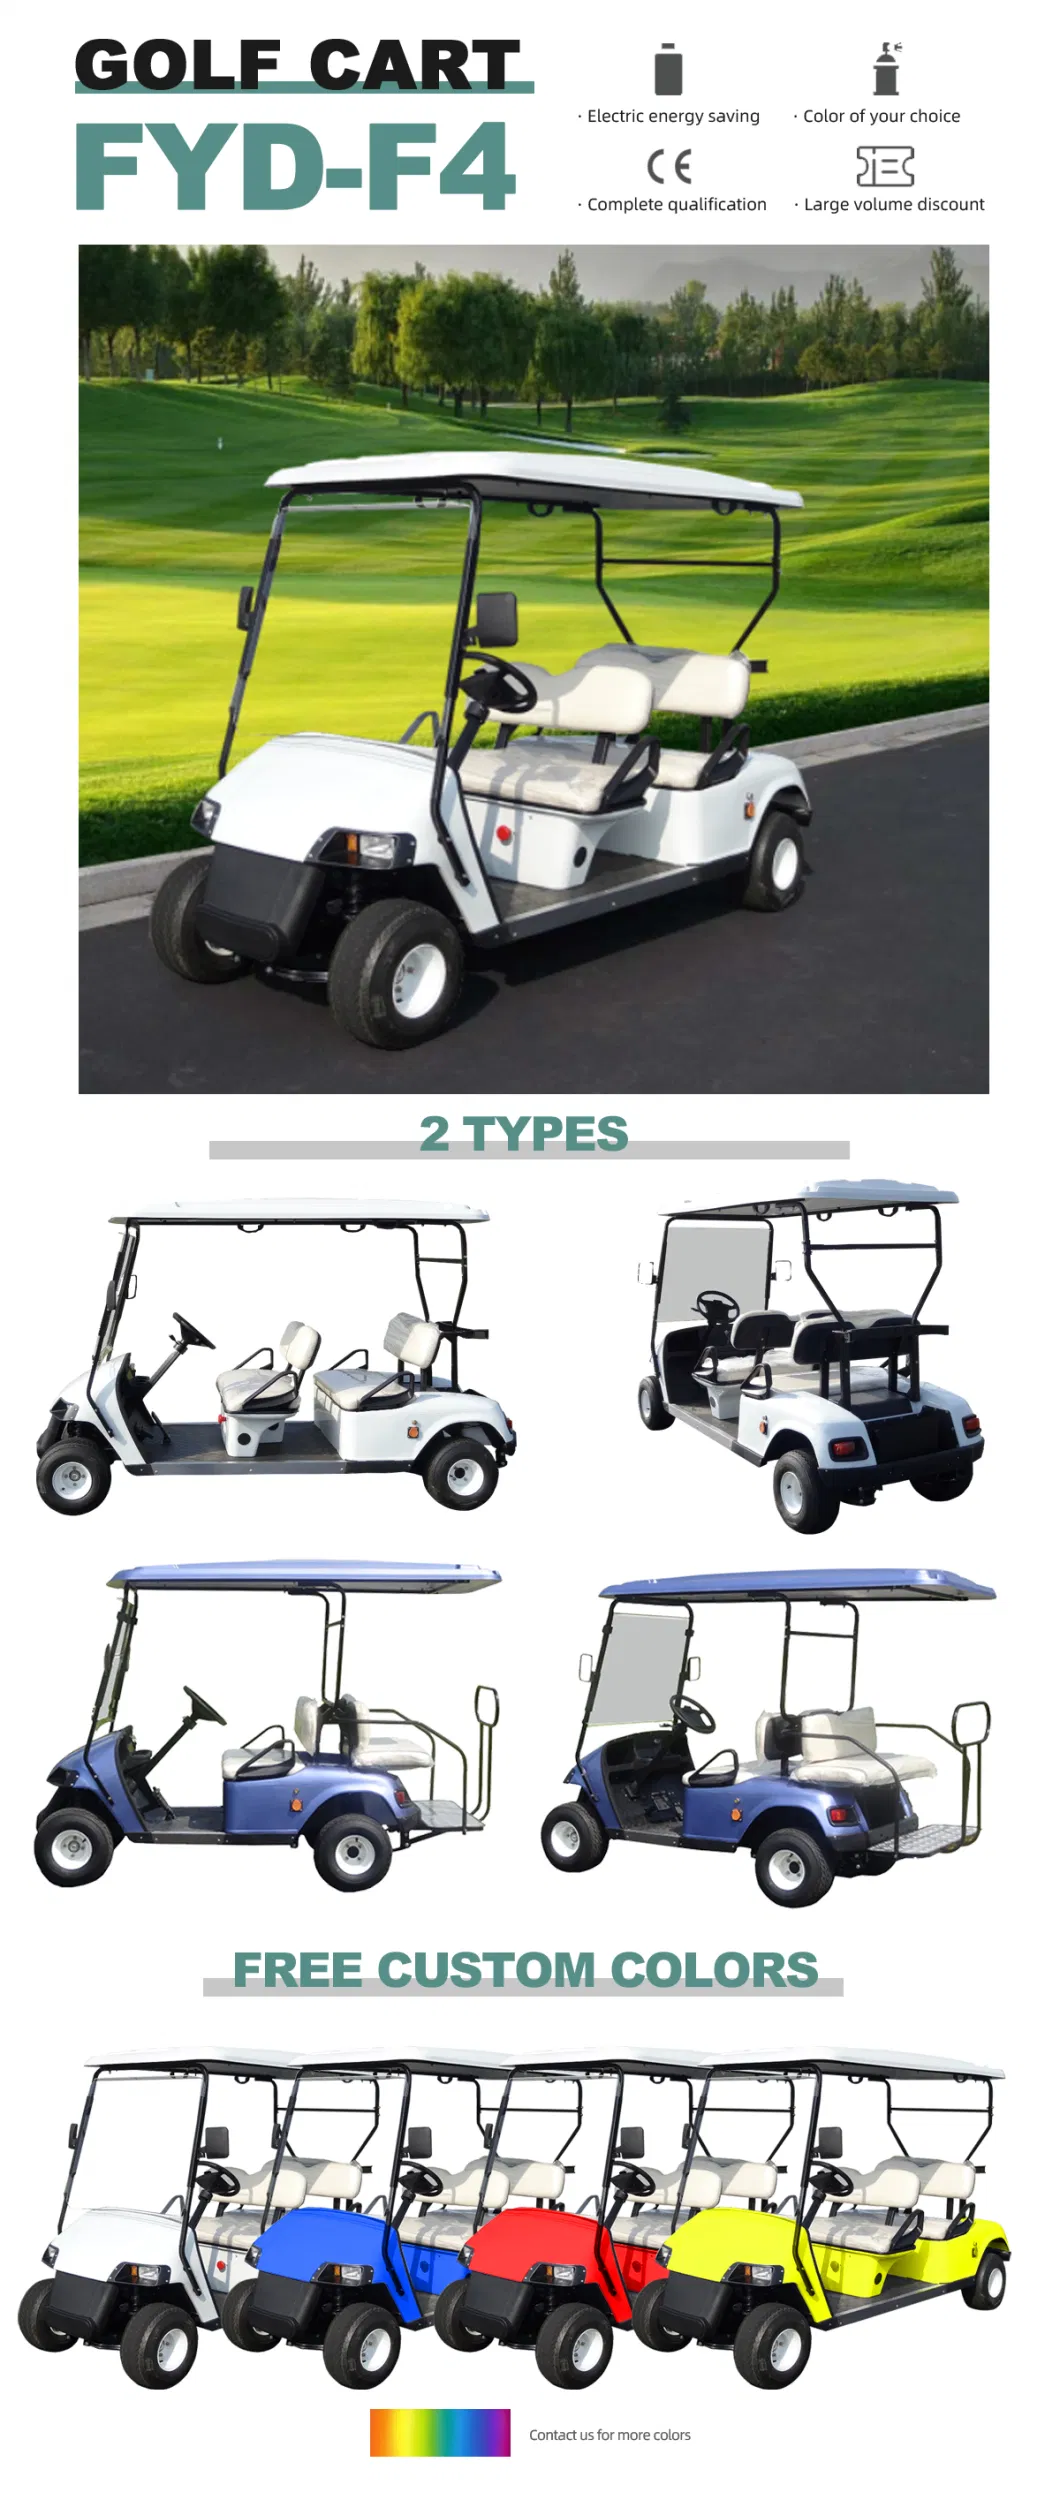 Golf Course Best Supply off Road Lsv Golf Sport Course Cart 30 Km/H Coastal Classic Electric Golf Carts for Sale with Big Storage Space